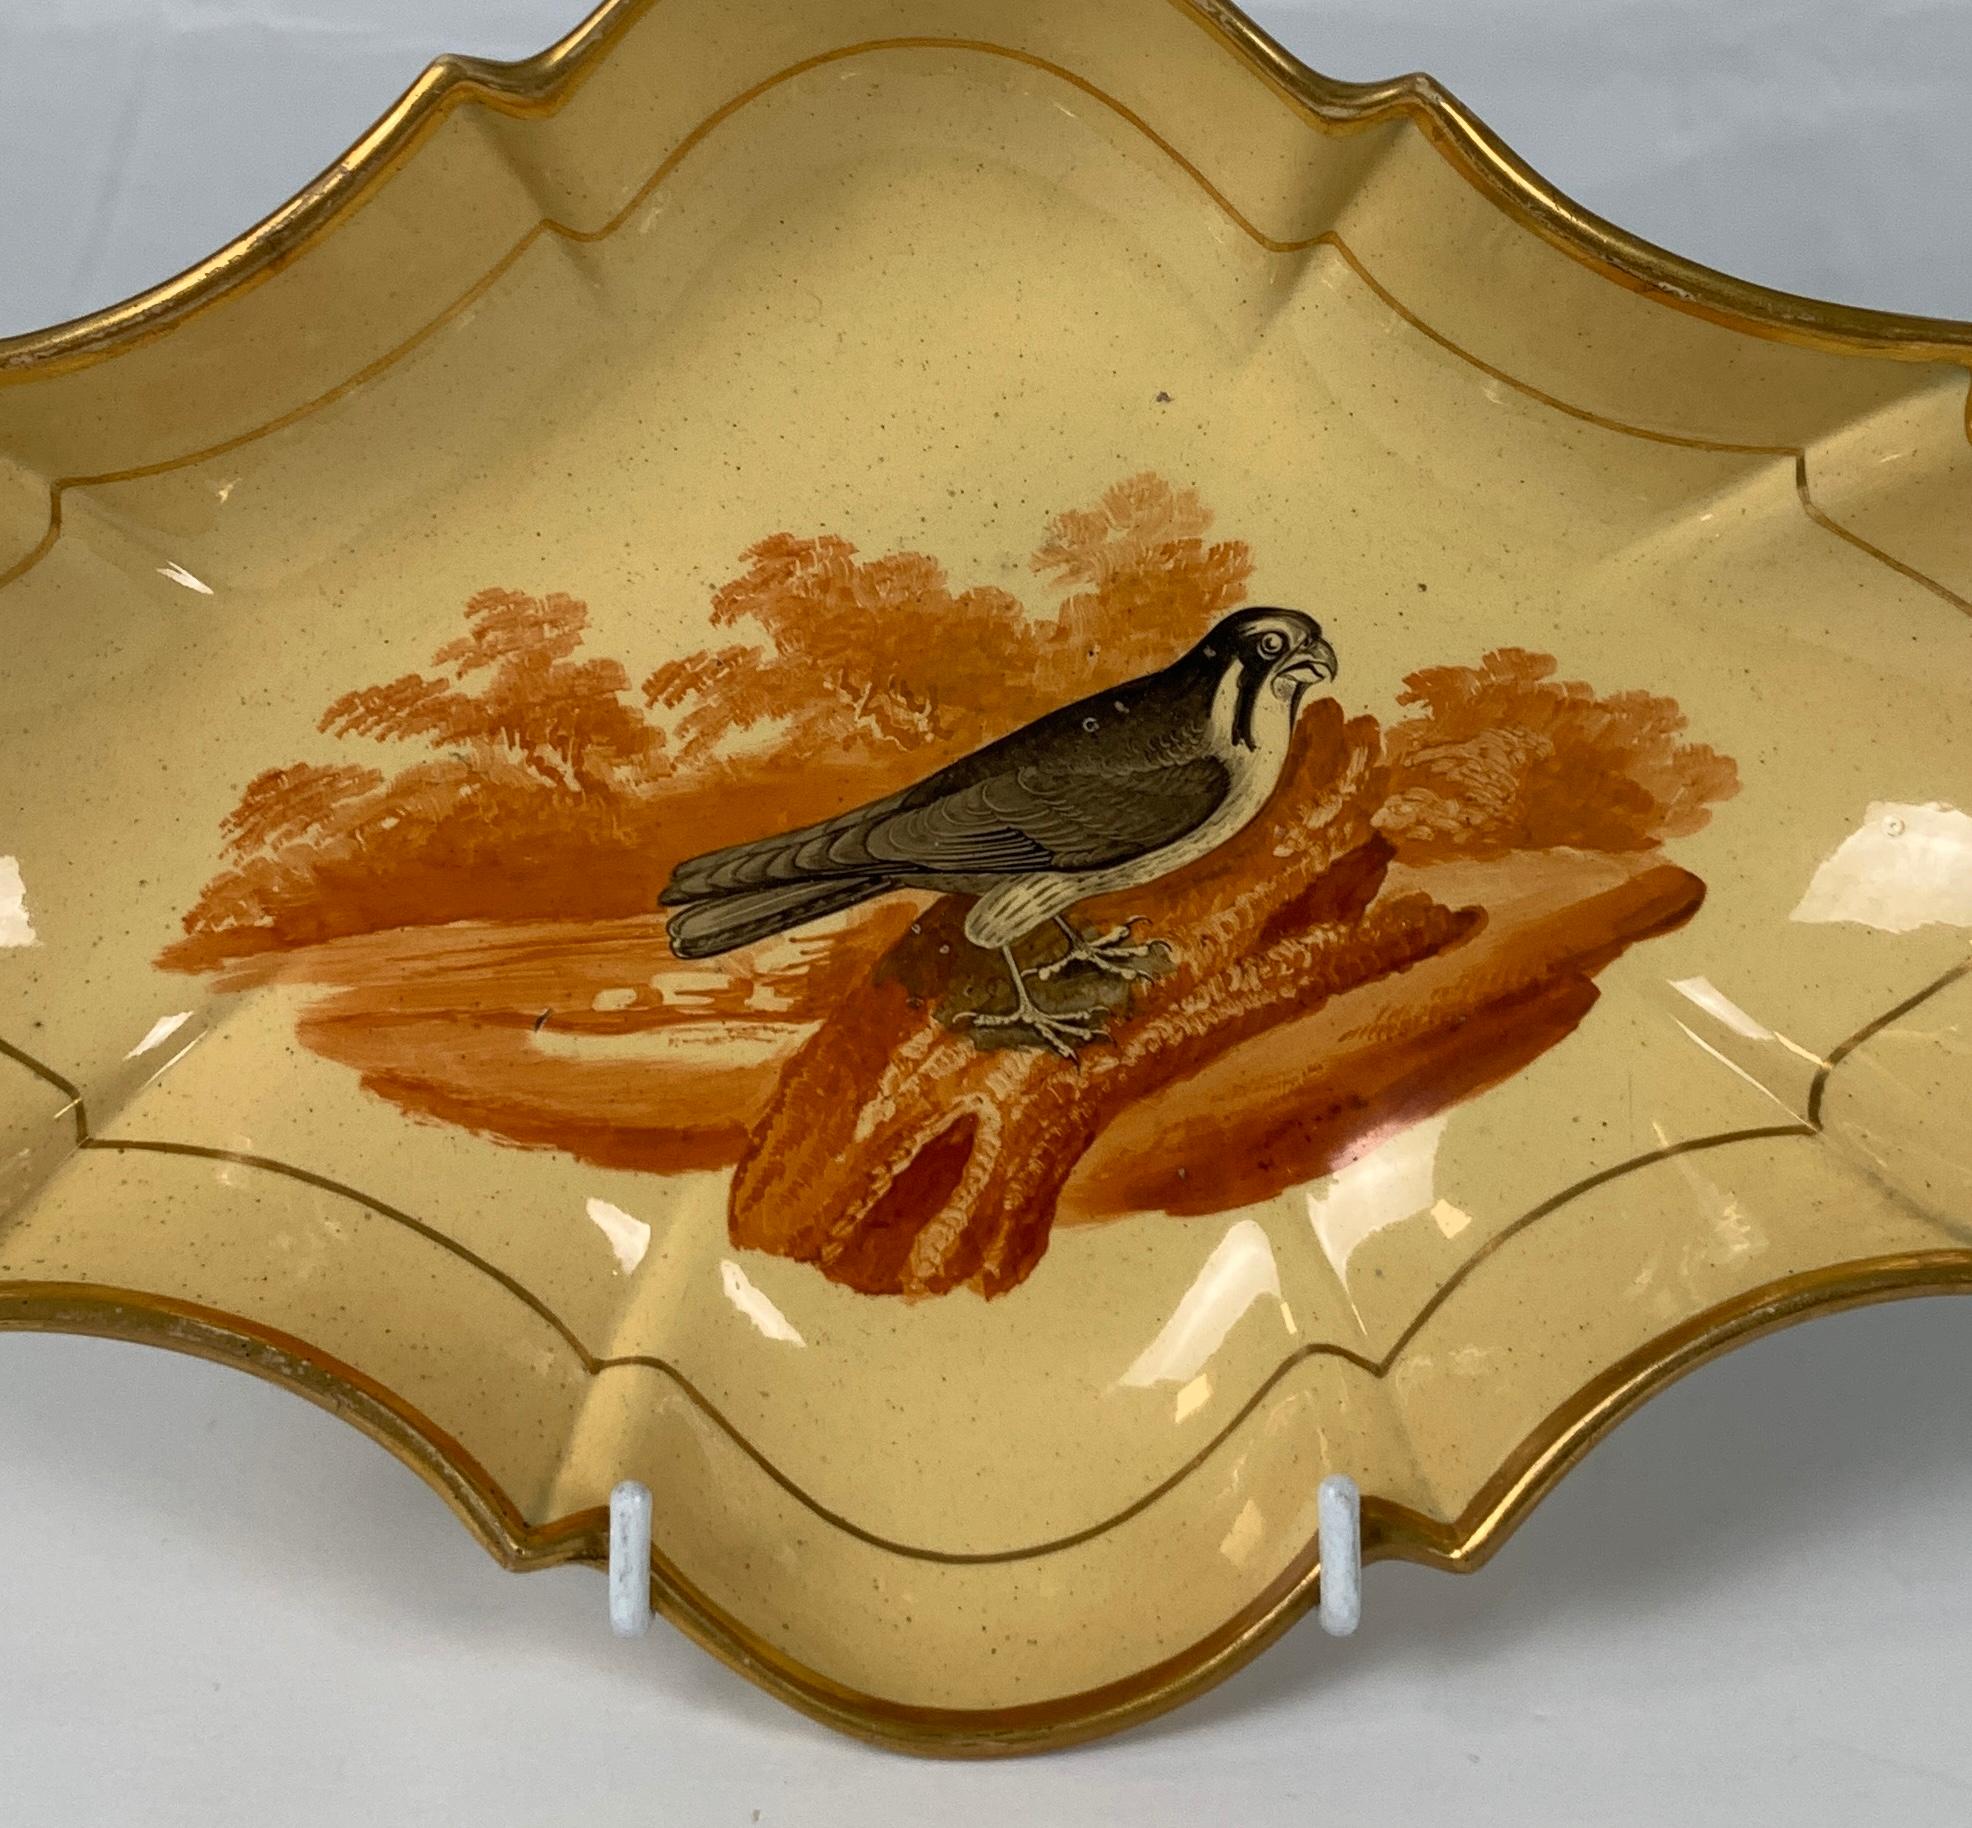 Made in England by Job Ridgway 1802-1808, this incredibly rare oval-shaped Drabware dish shows a hawk perched on a log. The image is crisp. According to the online Ridgway pattern book, this is Ridgway pattern 235, which is part of 